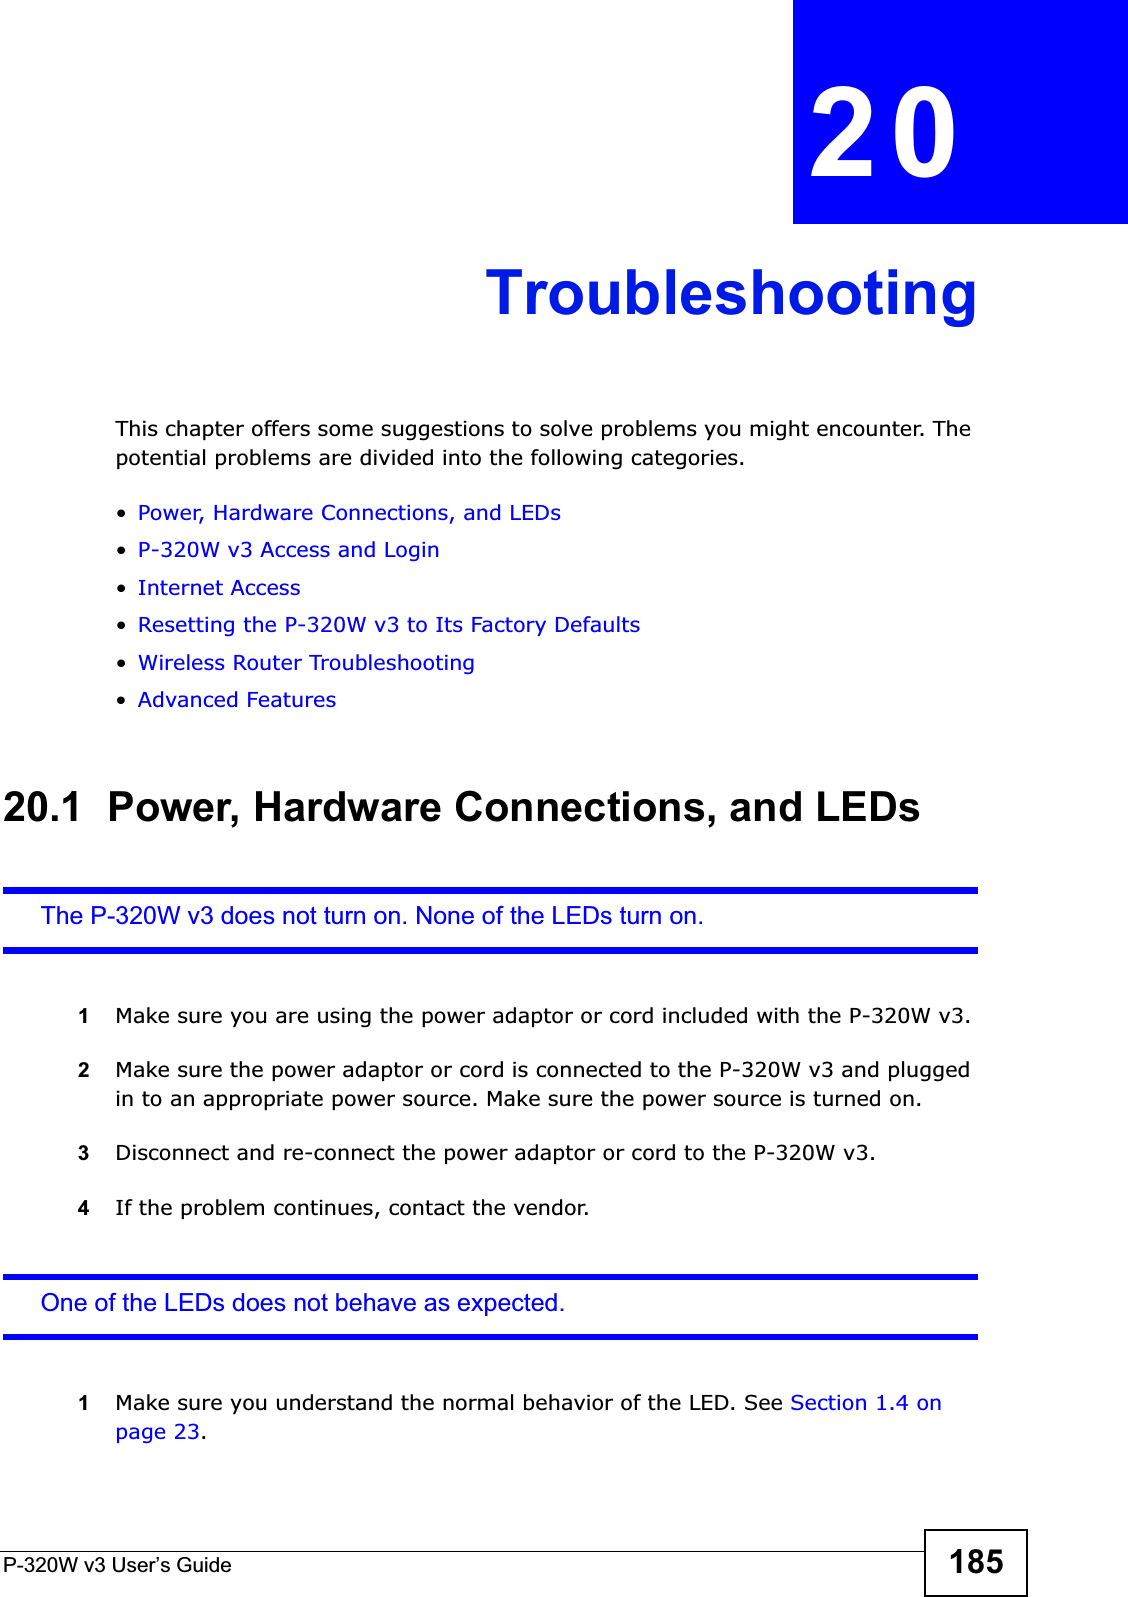 P-320W v3 User’s Guide 185CHAPTER 20TroubleshootingThis chapter offers some suggestions to solve problems you might encounter. The potential problems are divided into the following categories. •Power, Hardware Connections, and LEDs•P-320W v3 Access and Login•Internet Access•Resetting the P-320W v3 to Its Factory Defaults•Wireless Router Troubleshooting•Advanced Features20.1  Power, Hardware Connections, and LEDsThe P-320W v3 does not turn on. None of the LEDs turn on.1Make sure you are using the power adaptor or cord included with the P-320W v3.2Make sure the power adaptor or cord is connected to the P-320W v3 and plugged in to an appropriate power source. Make sure the power source is turned on.3Disconnect and re-connect the power adaptor or cord to the P-320W v3.4If the problem continues, contact the vendor.One of the LEDs does not behave as expected.1Make sure you understand the normal behavior of the LED. See Section 1.4 on page 23.